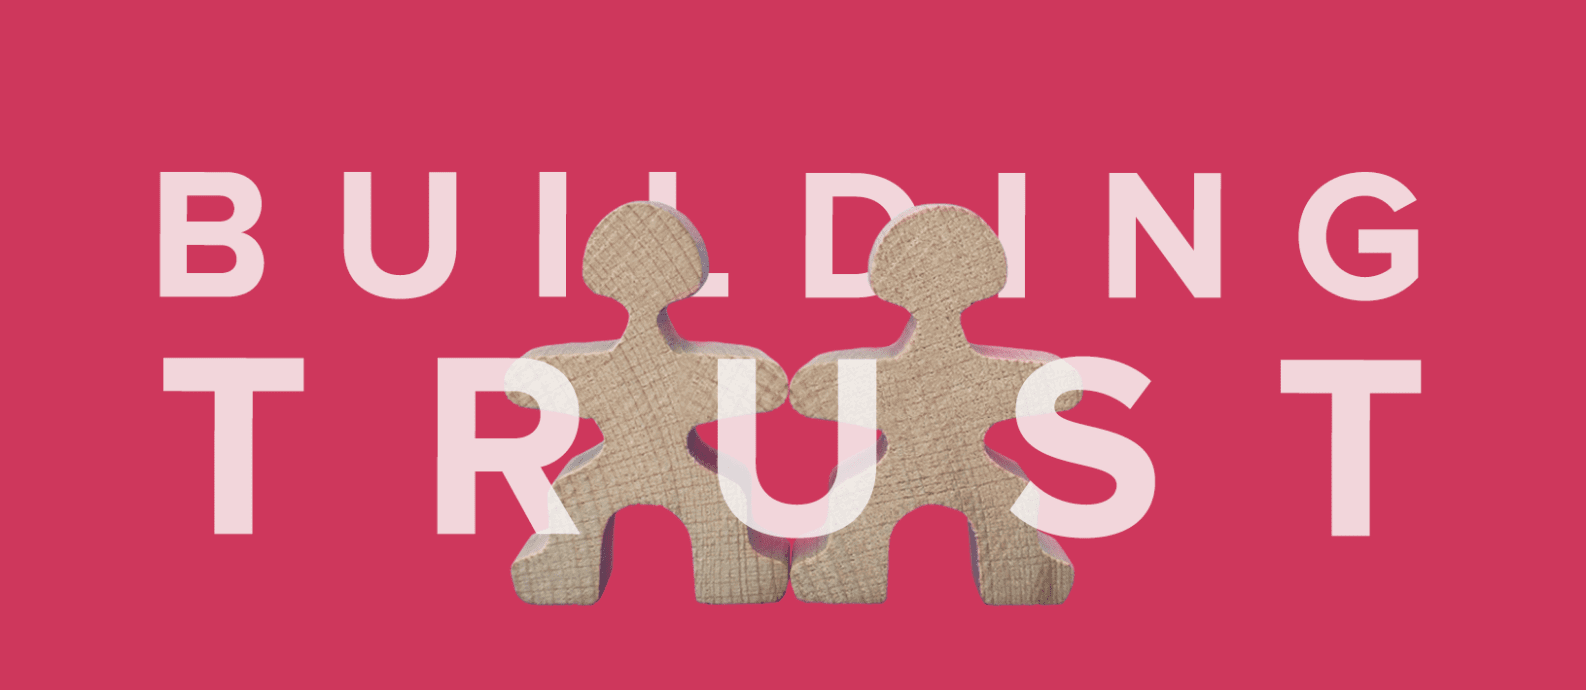 Building trust with Your customers